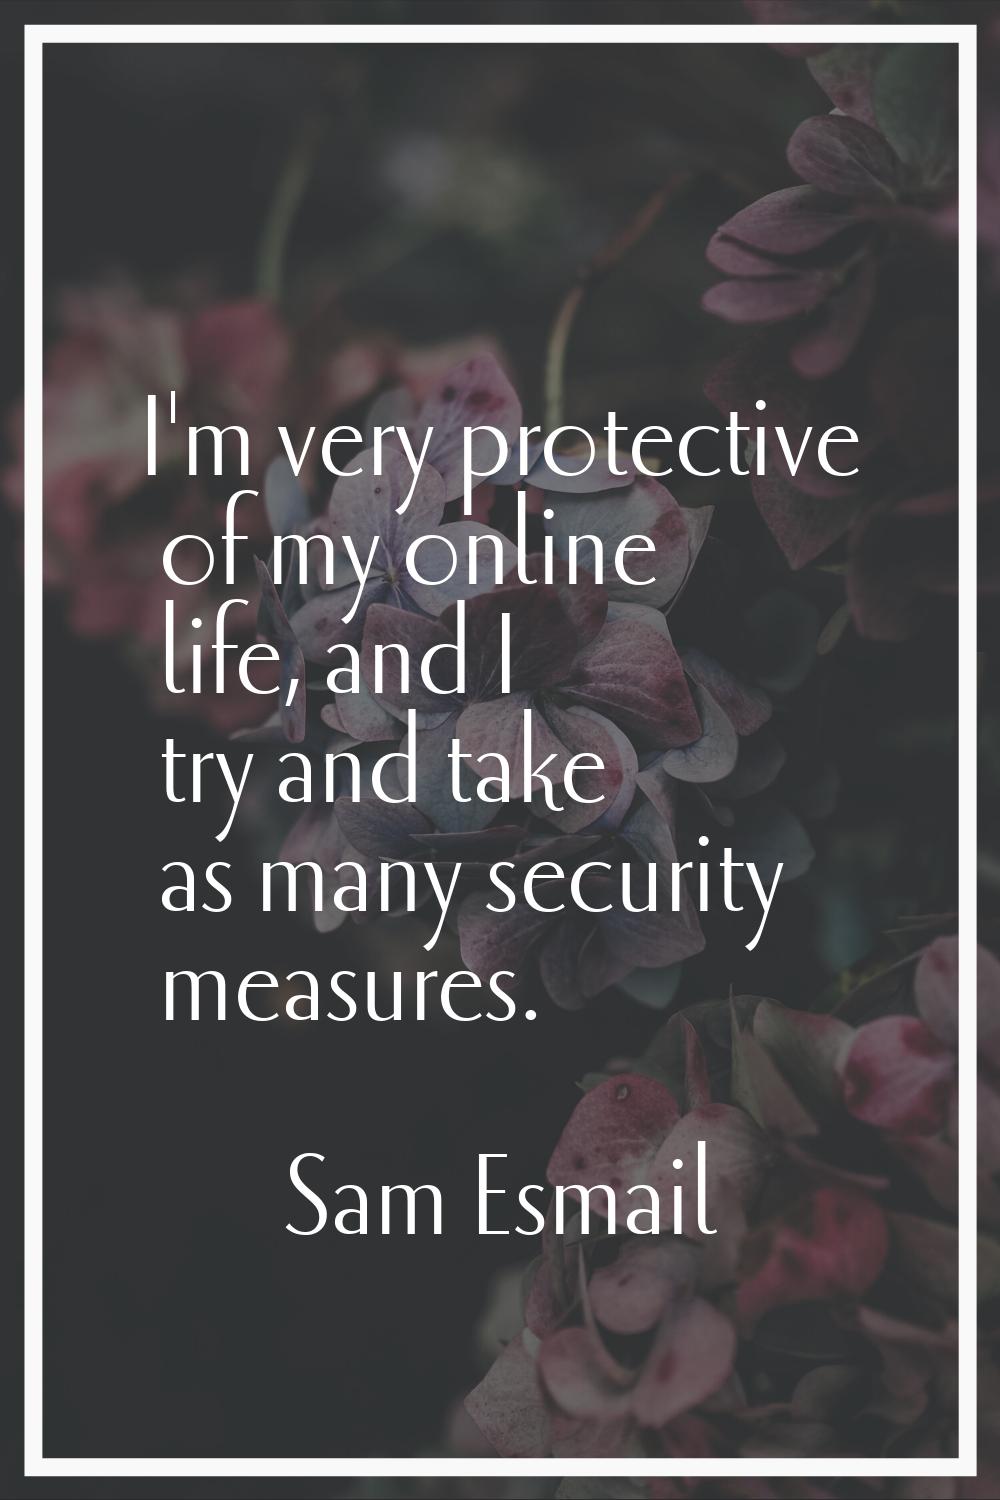 I'm very protective of my online life, and I try and take as many security measures.